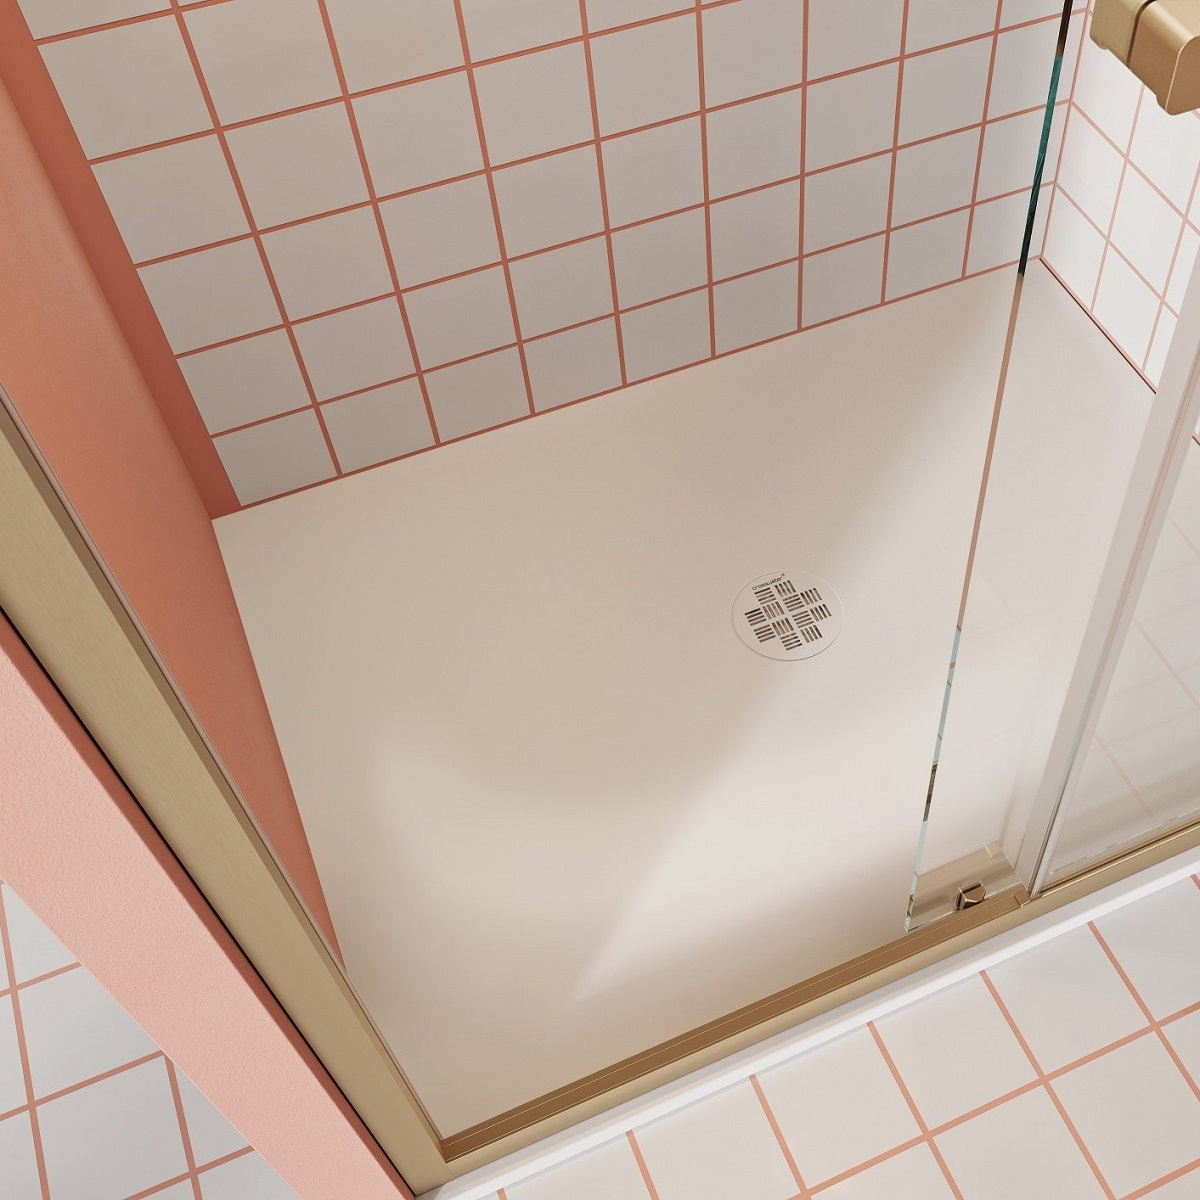 white tiles with pink grout in a shower cubicle with glass door and white shower tray